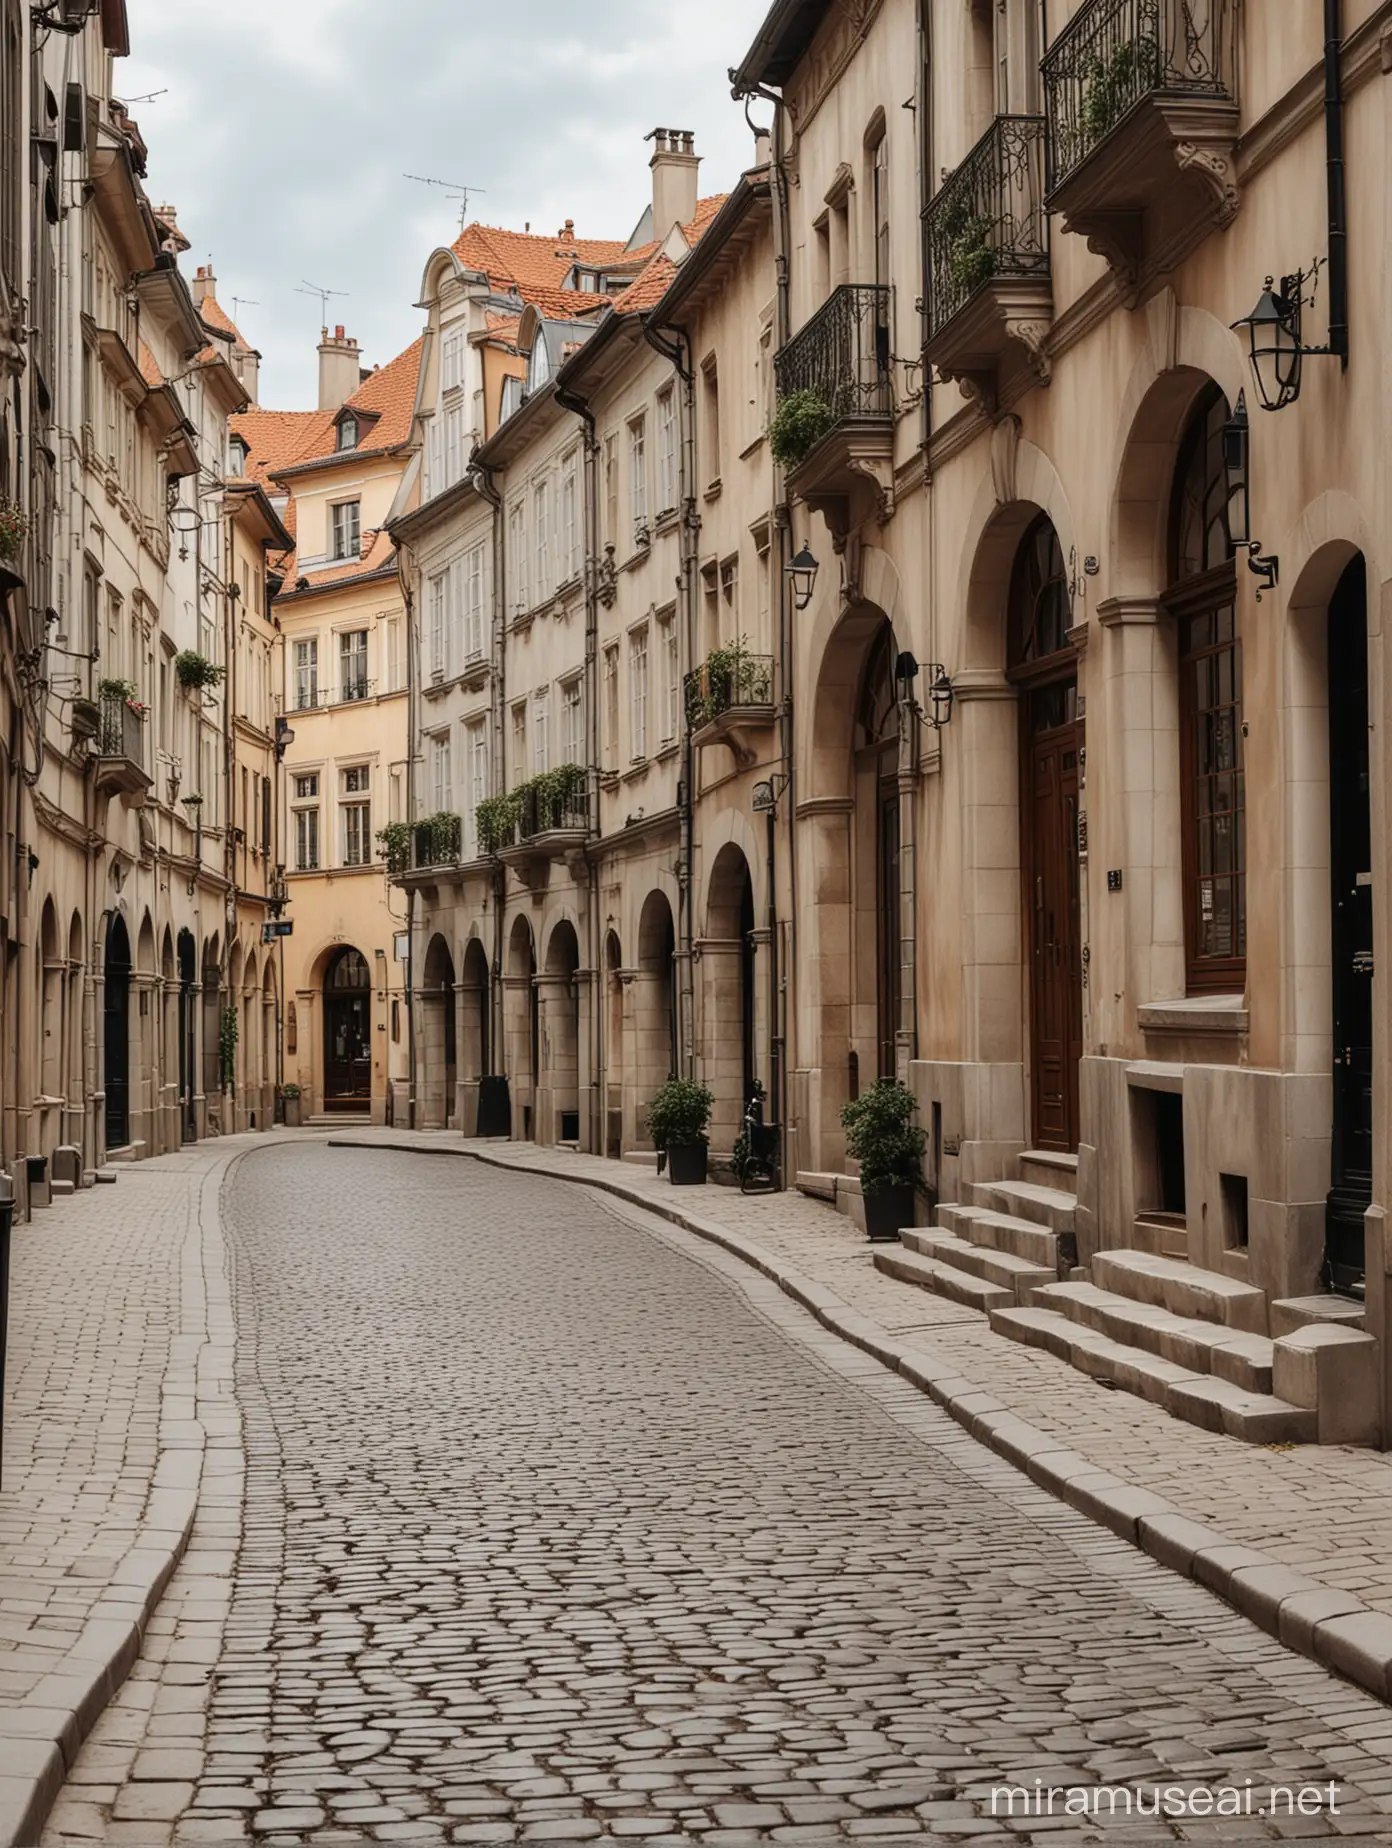 European Fashionable Street with Vibrant Storefronts and Cobblestone Path